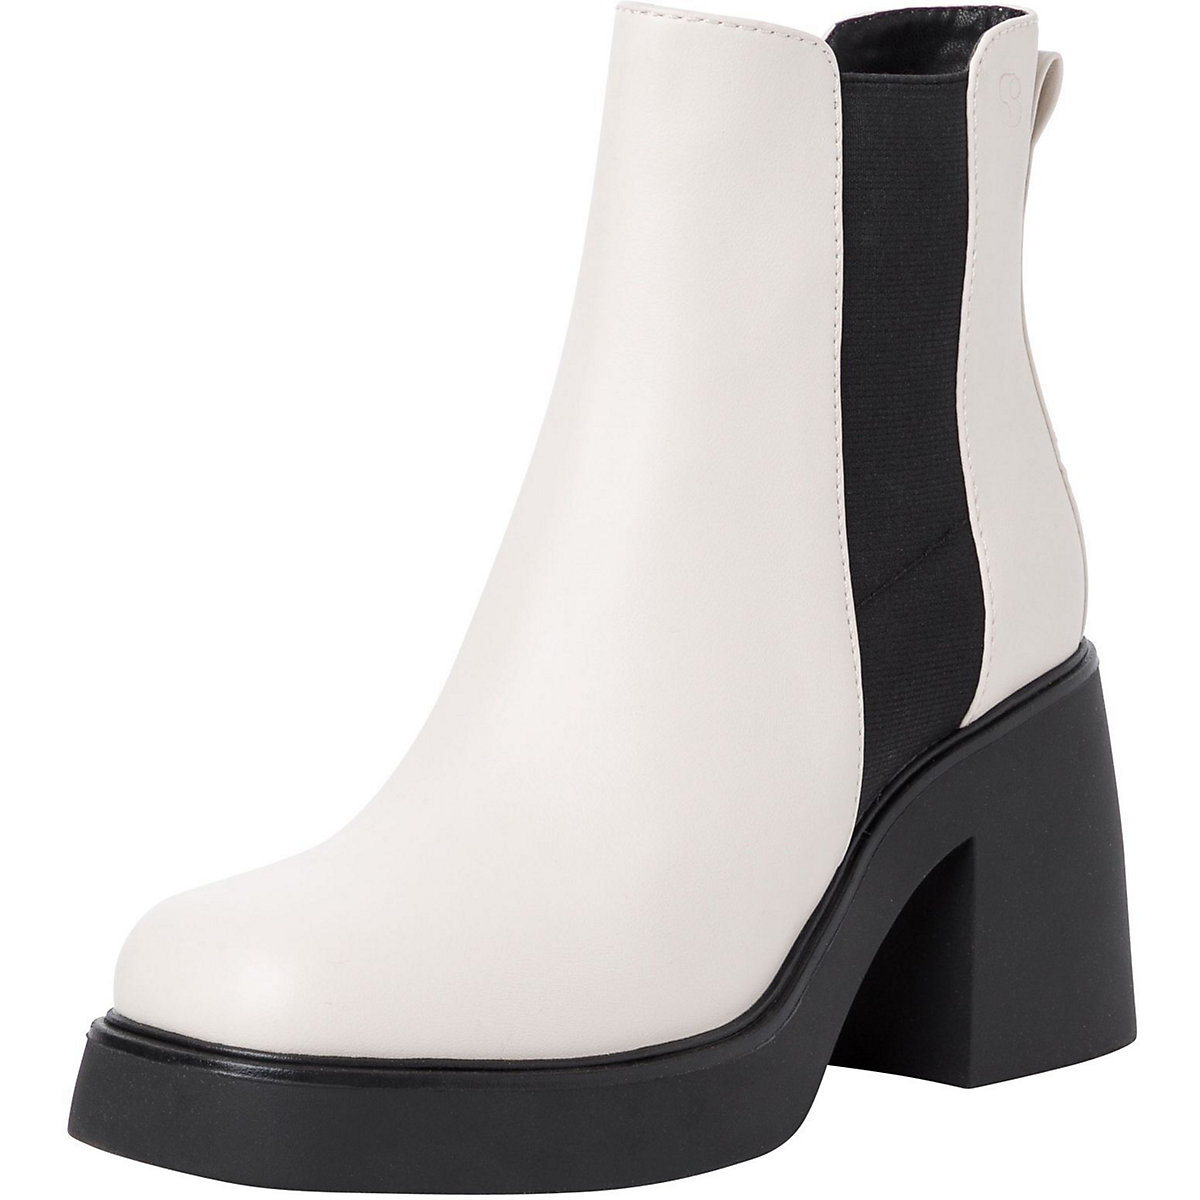 s.Oliver s.Oliver Chelsea Boot Chelsea Boots weiß